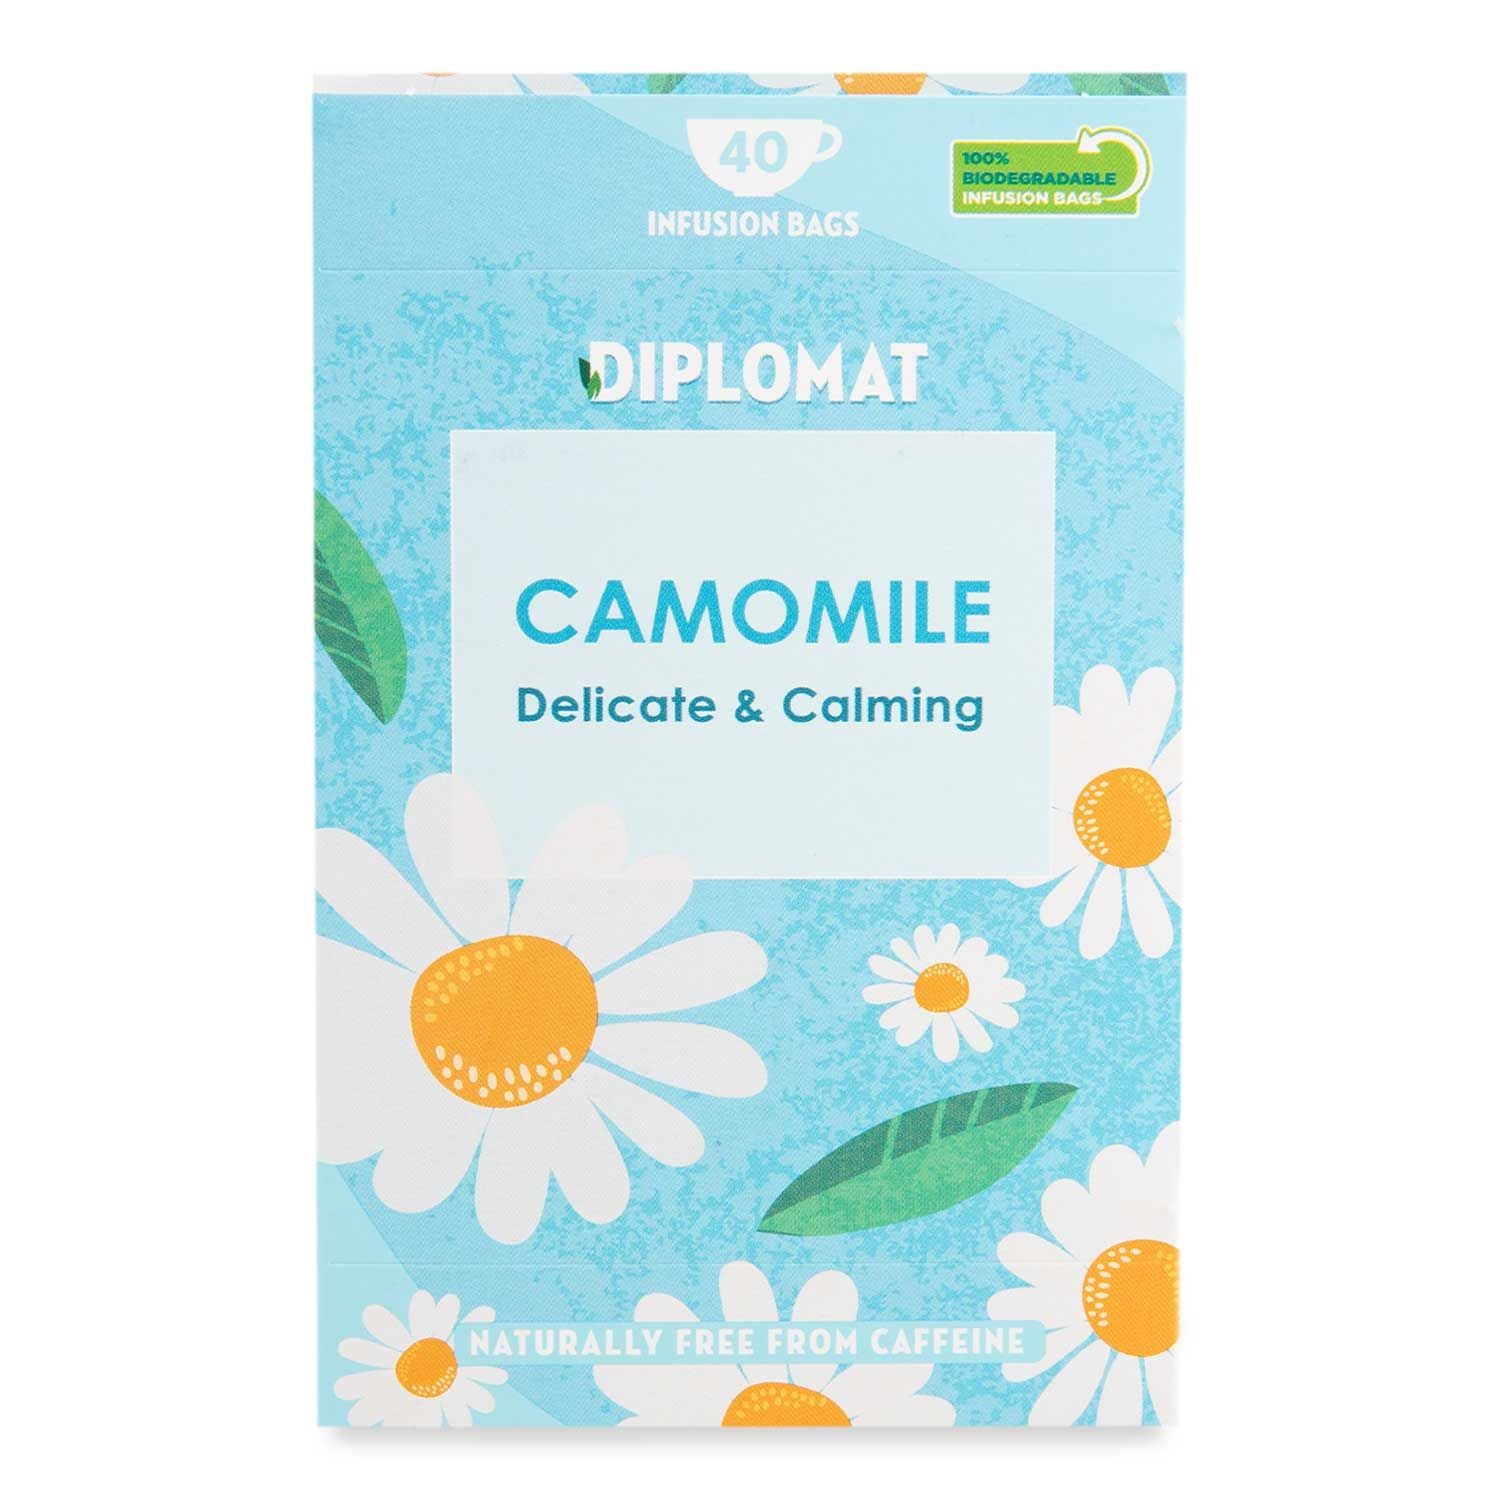 Diplomat Camomile Infusion Tea Bags 60g/40 Pack